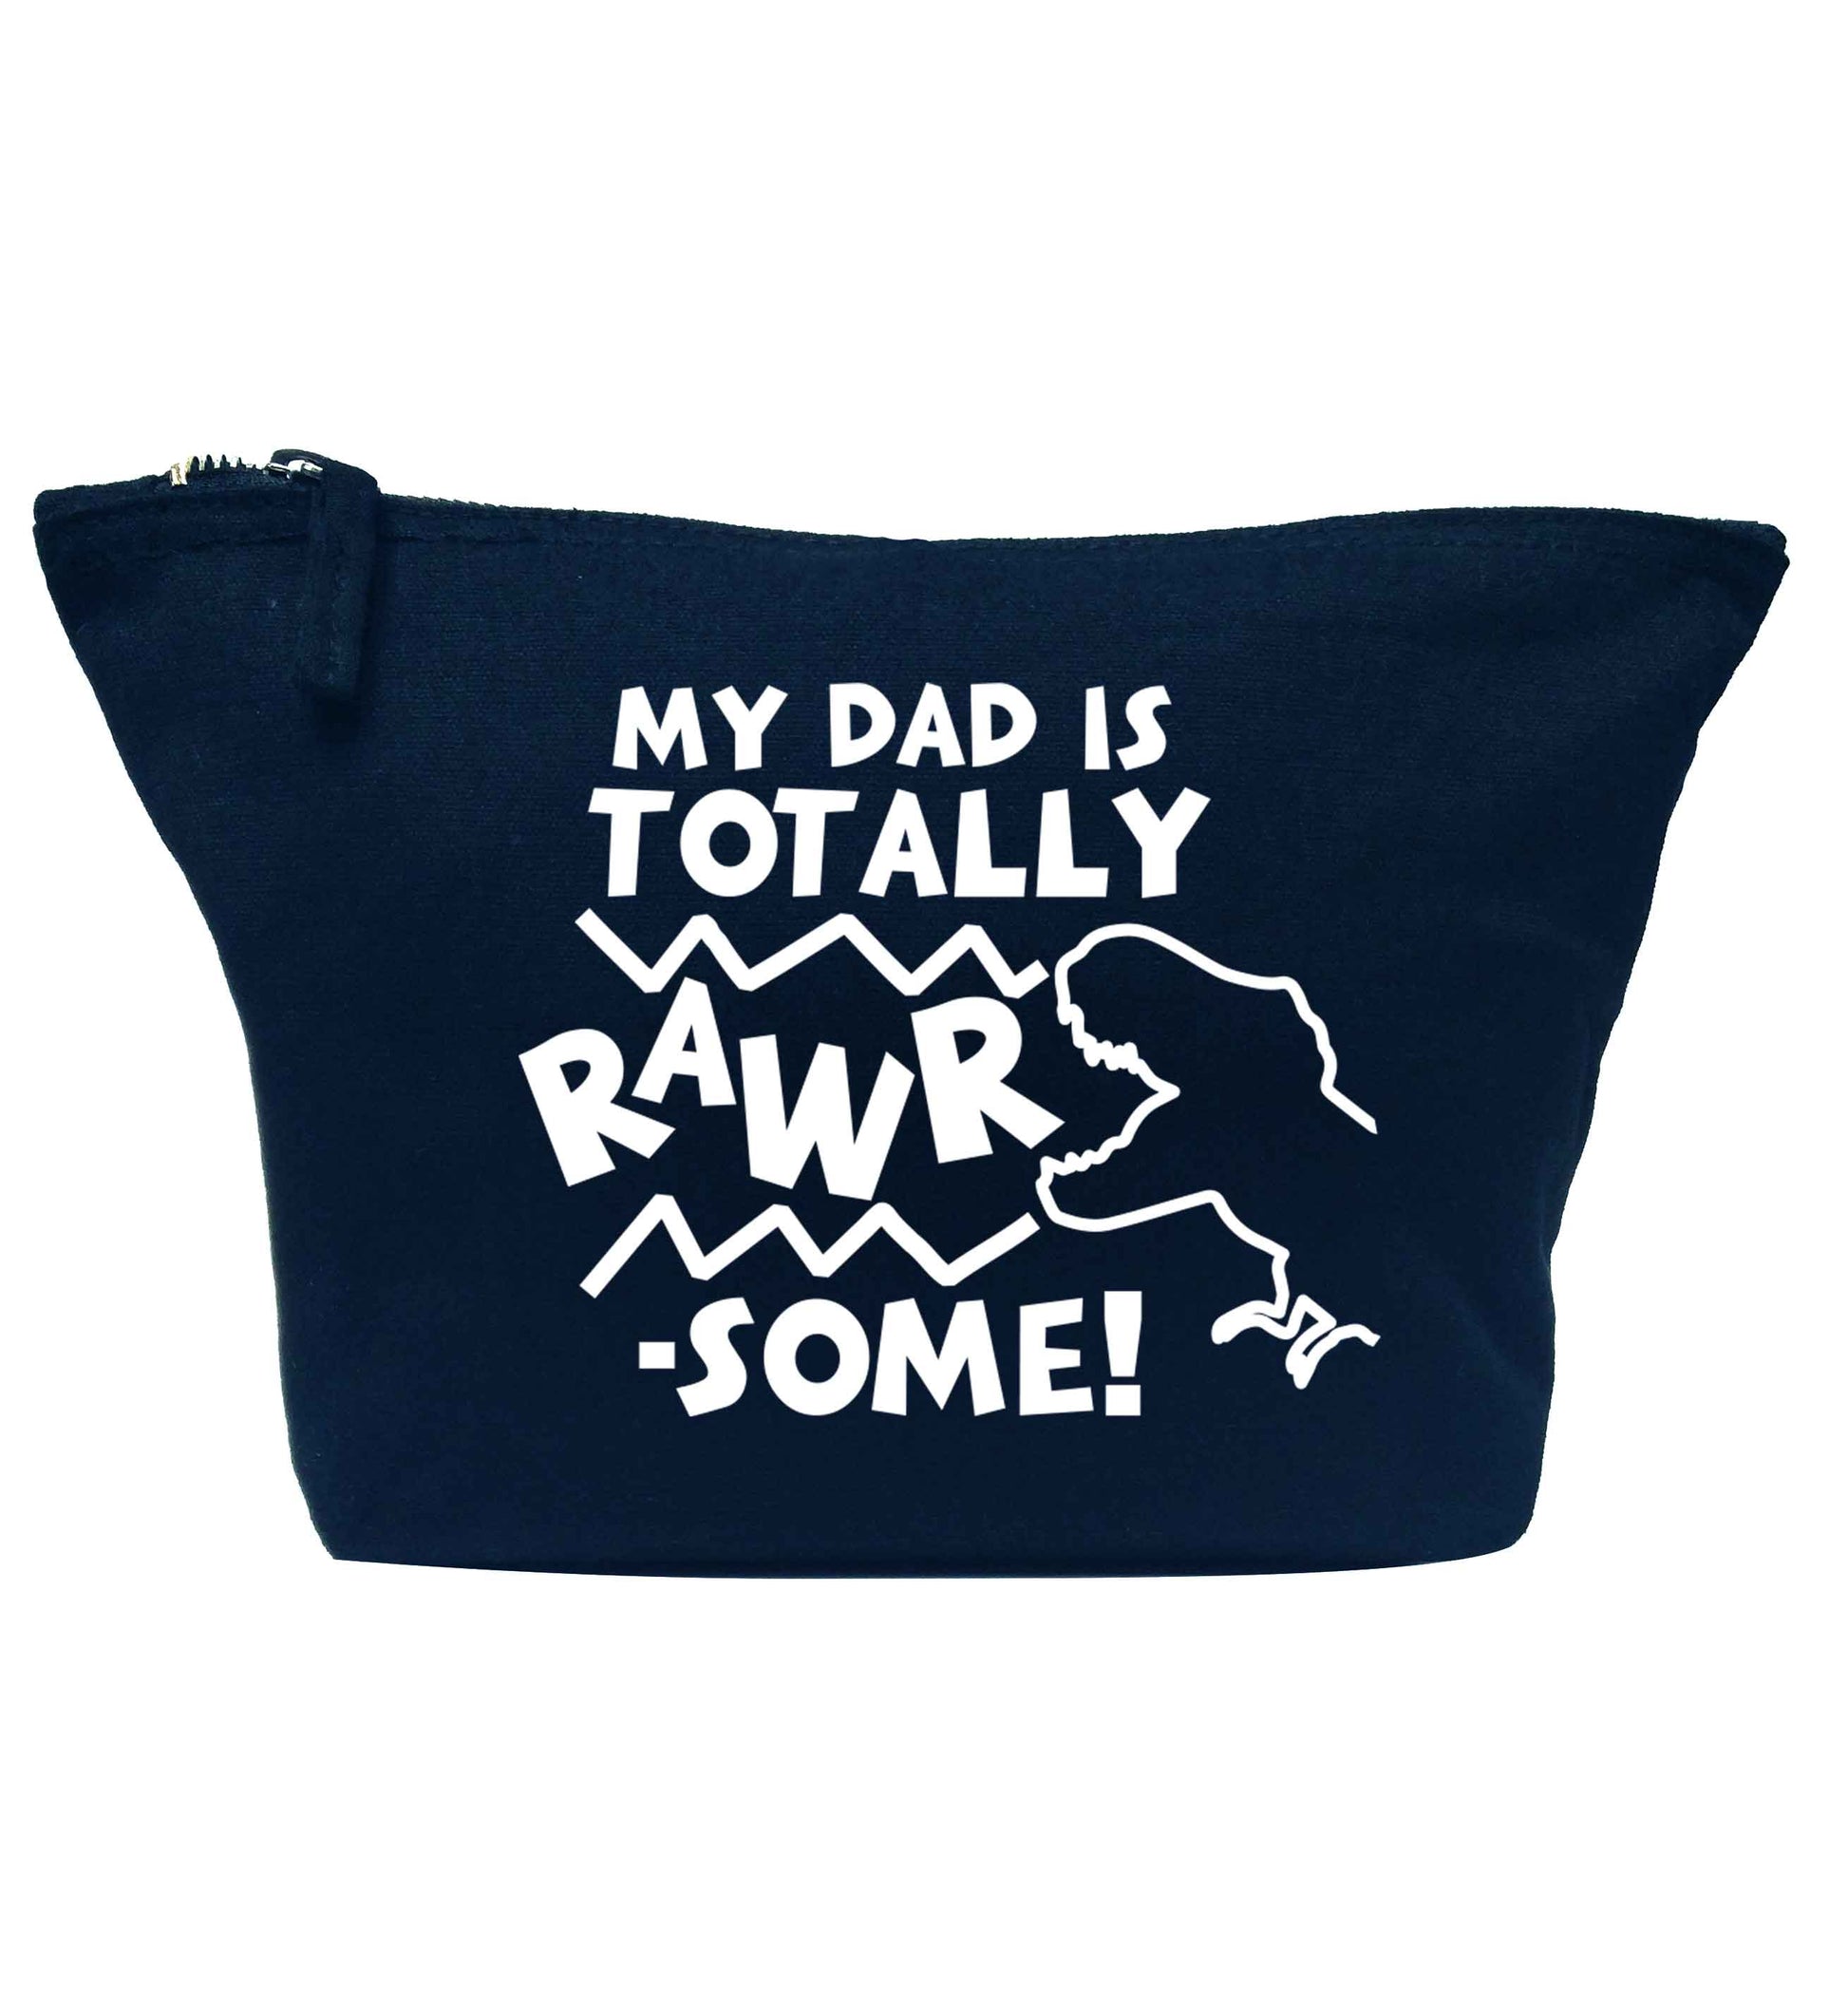 My dad is totally rawrsome navy makeup bag